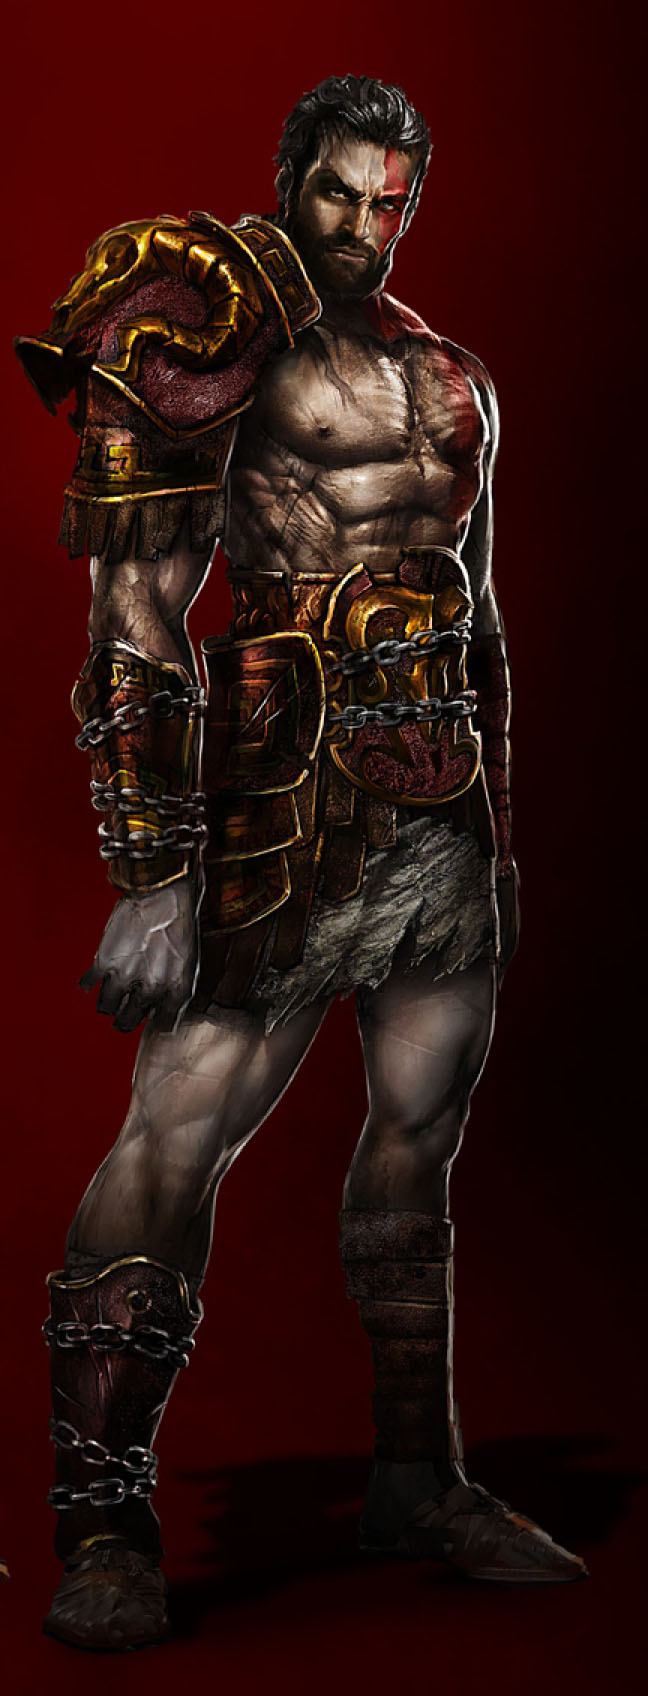 Could Hercules potentially be as strong as Kratos? How would